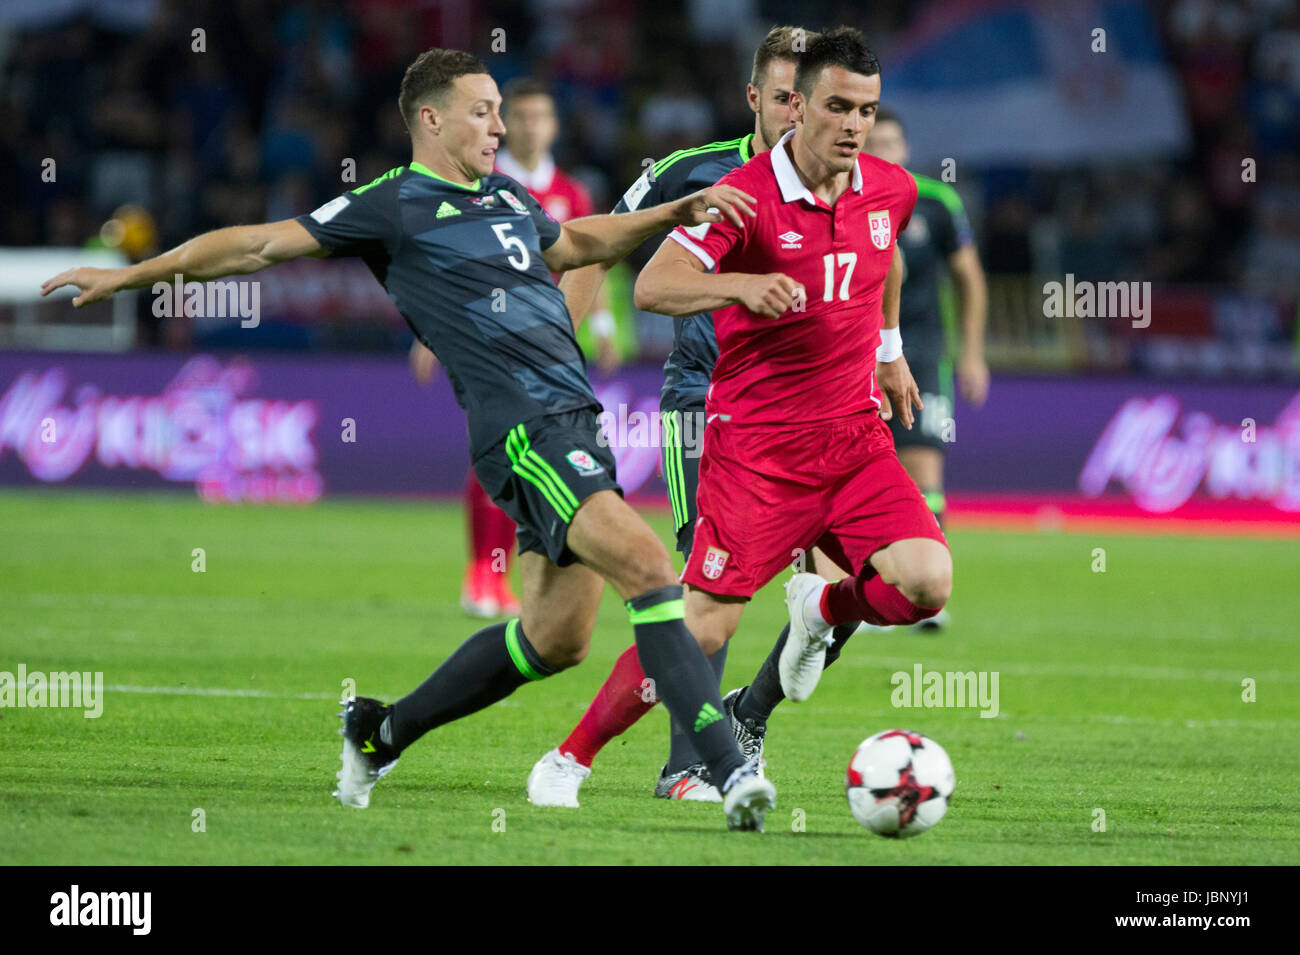 BELGRADE, SERBIA - JUNE 11, 2017: James Chester (L) of Wales in action against Filip Kostic (R) of Serbia during the 2018 FIFA World Cup Qualifier mat Stock Photo